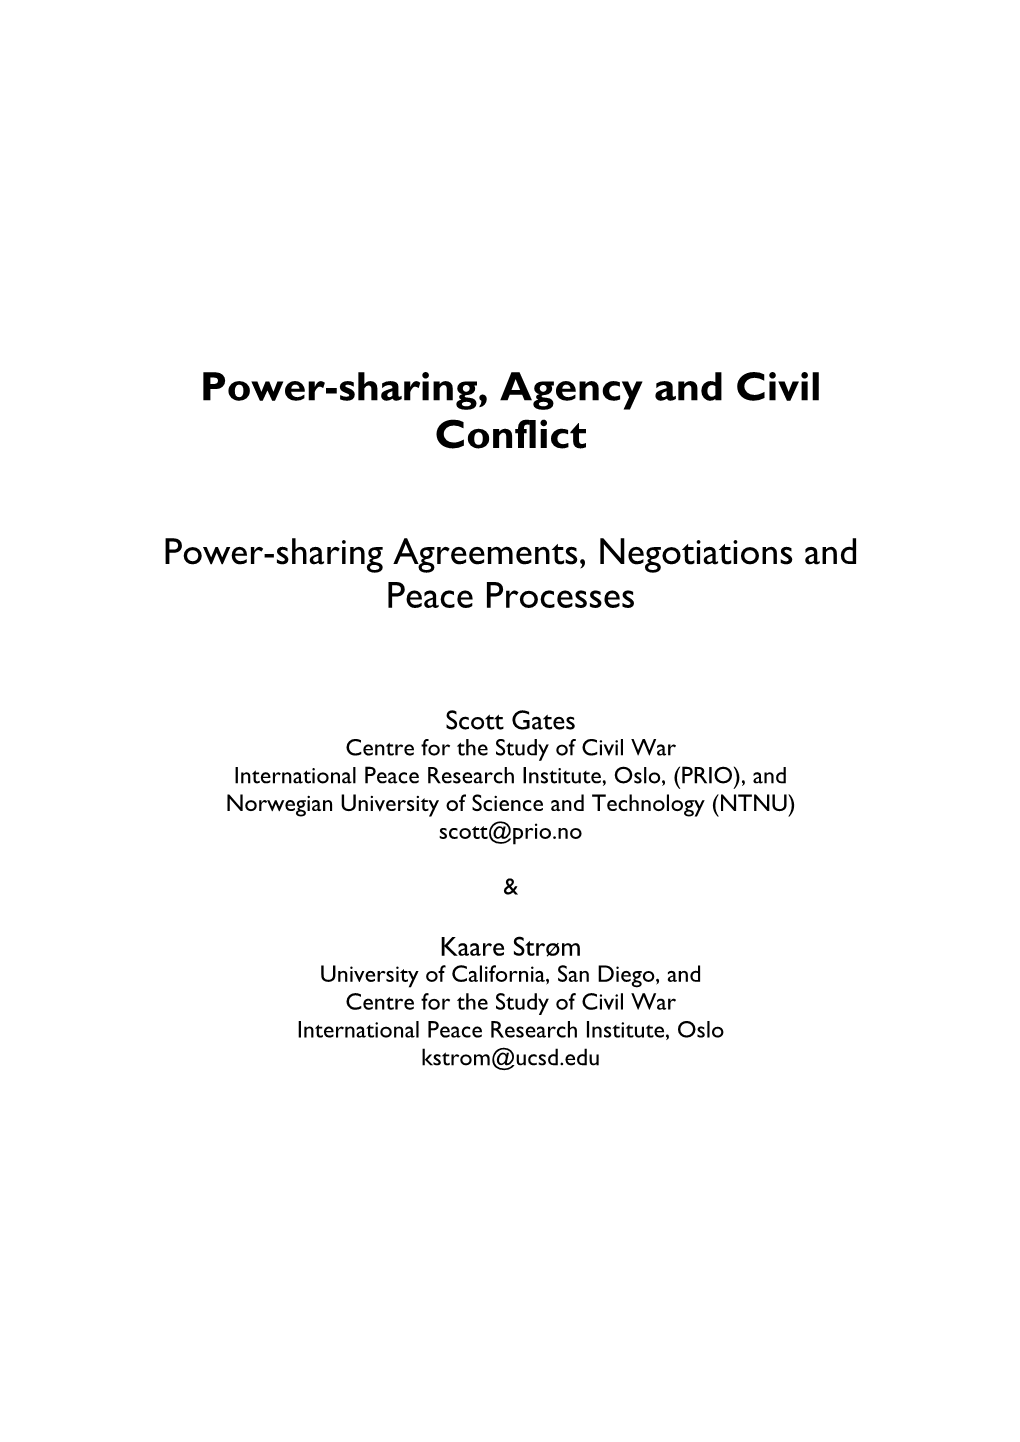 Power-Sharing, Agency and Civil Conflict